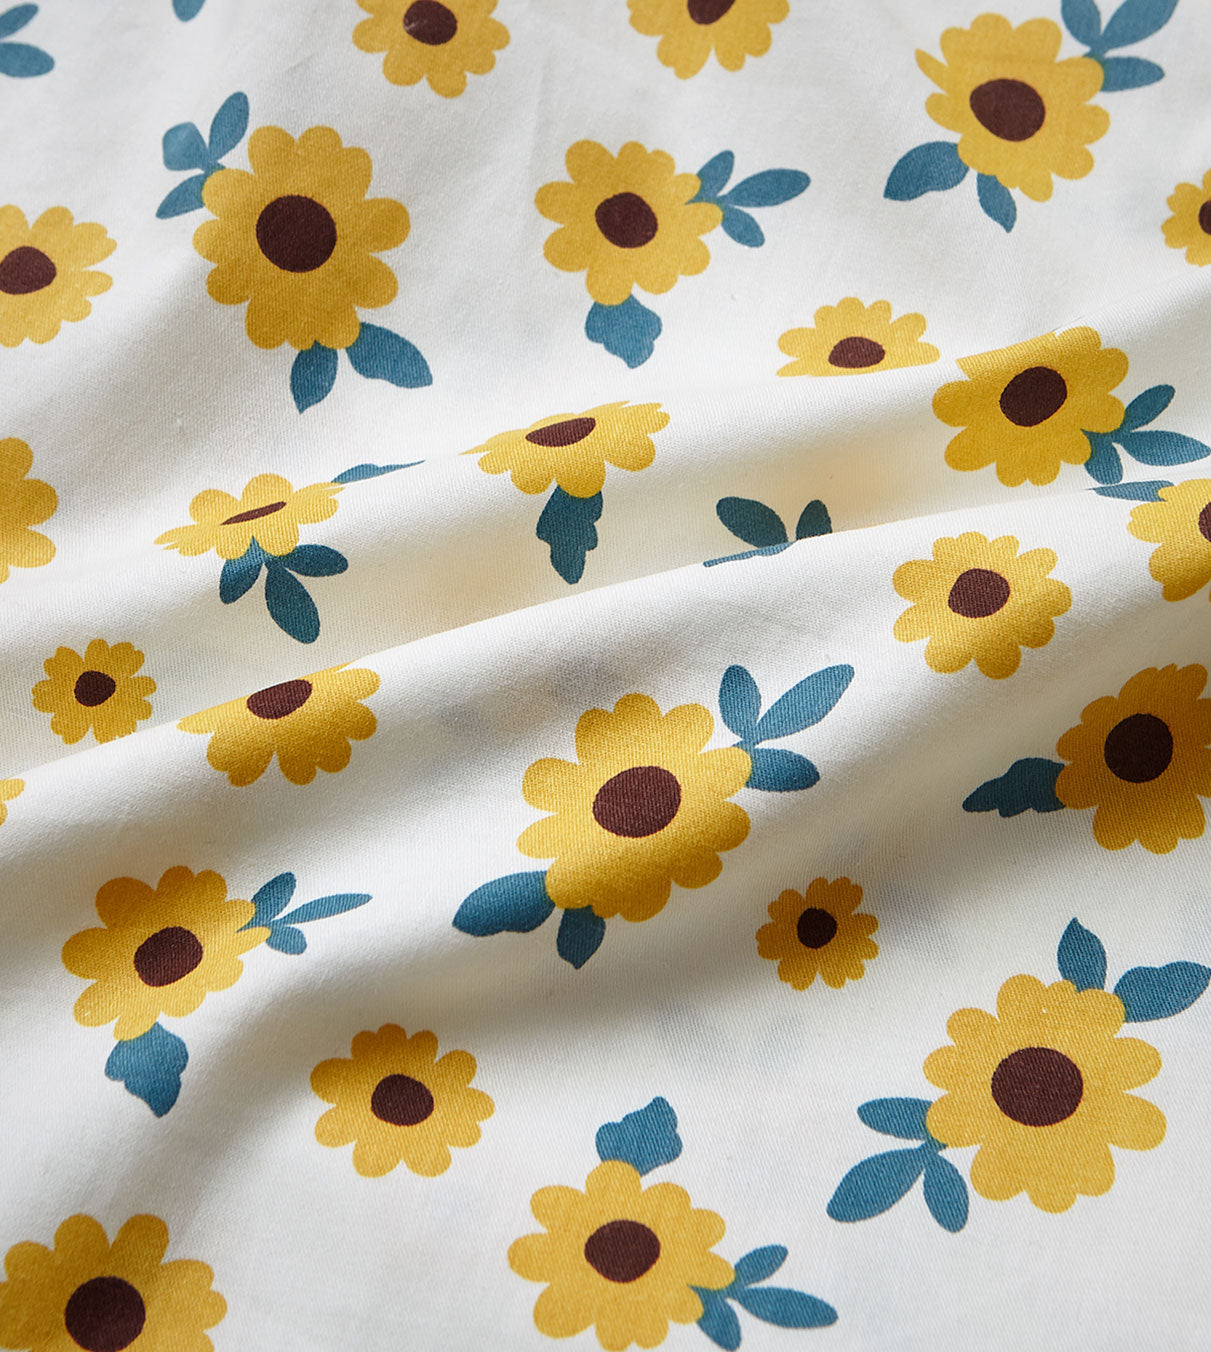 Product: Cotton Weighted Blanket Duvet Cover | Color: Sunflower Field of Dreams